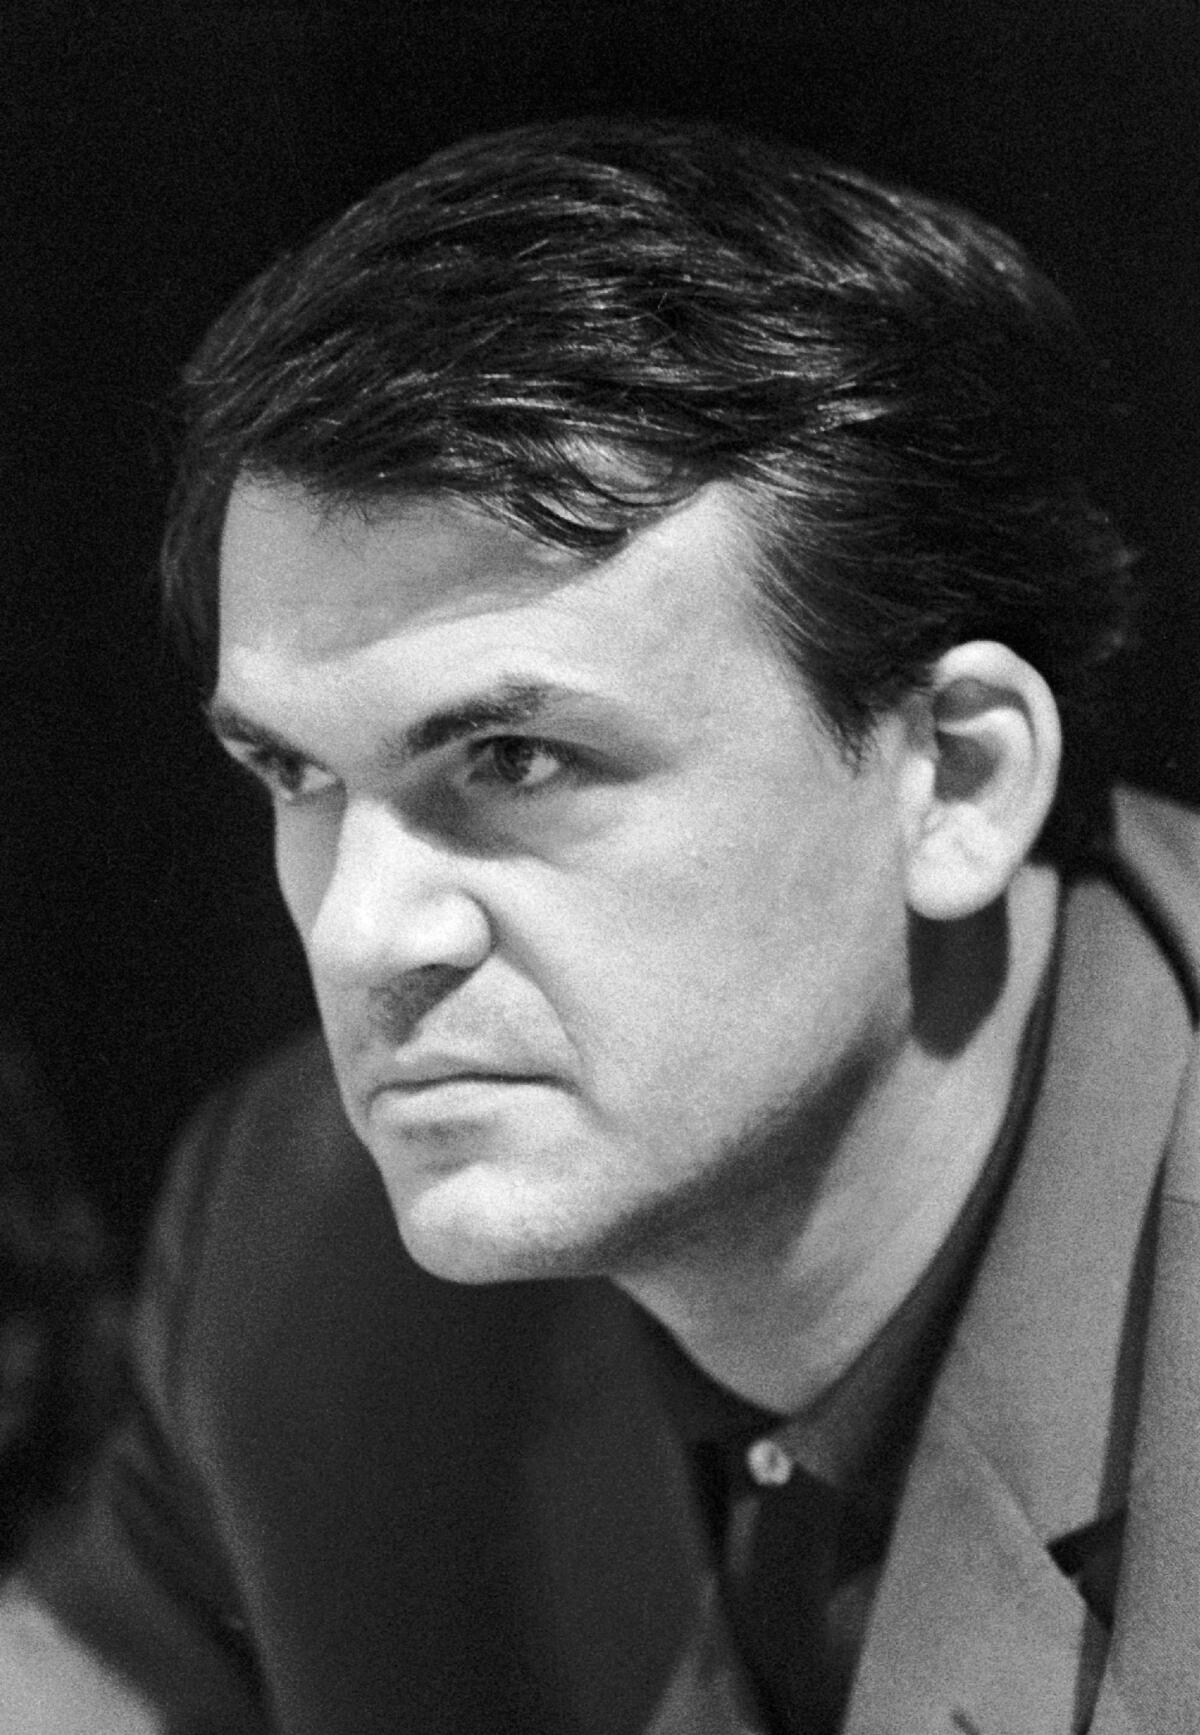 A black and white photo of Milan Kundera from 1967 wearing a blazer and leaning forward.